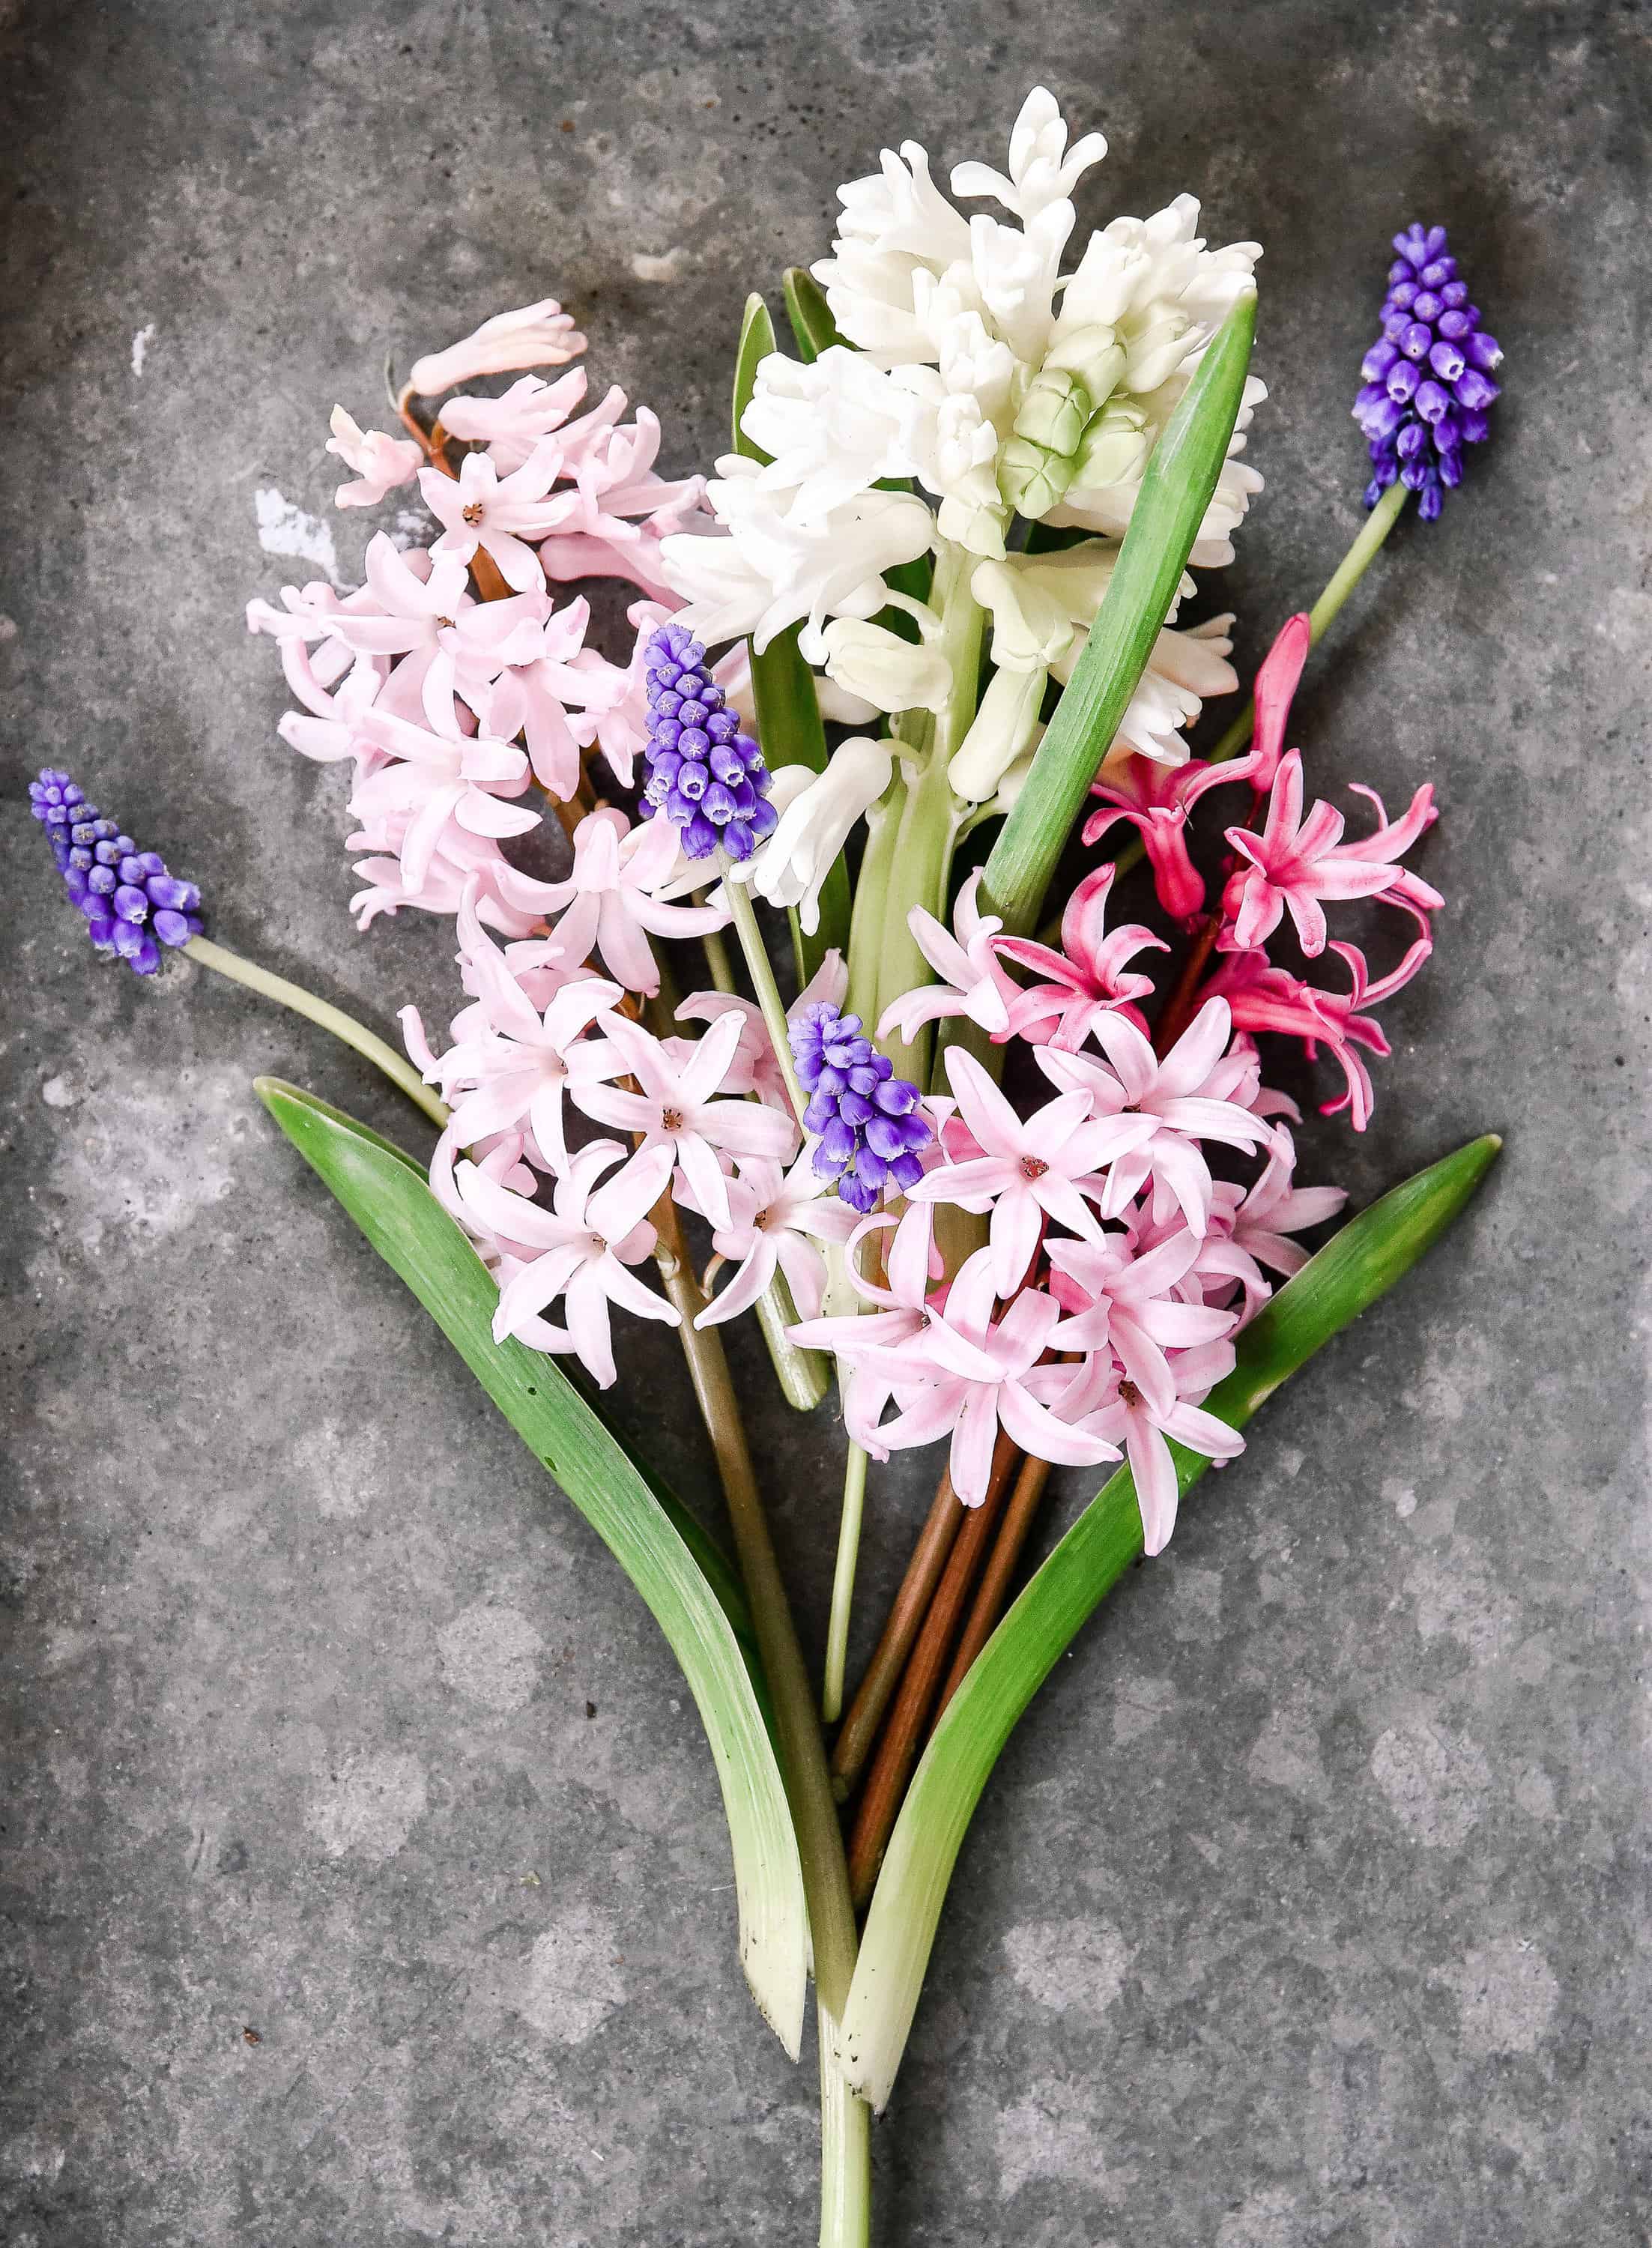 Forcing hyacinth bulbs indoors is easy with just a little preparation! Read below to learn how to force spring bulbs indoors!